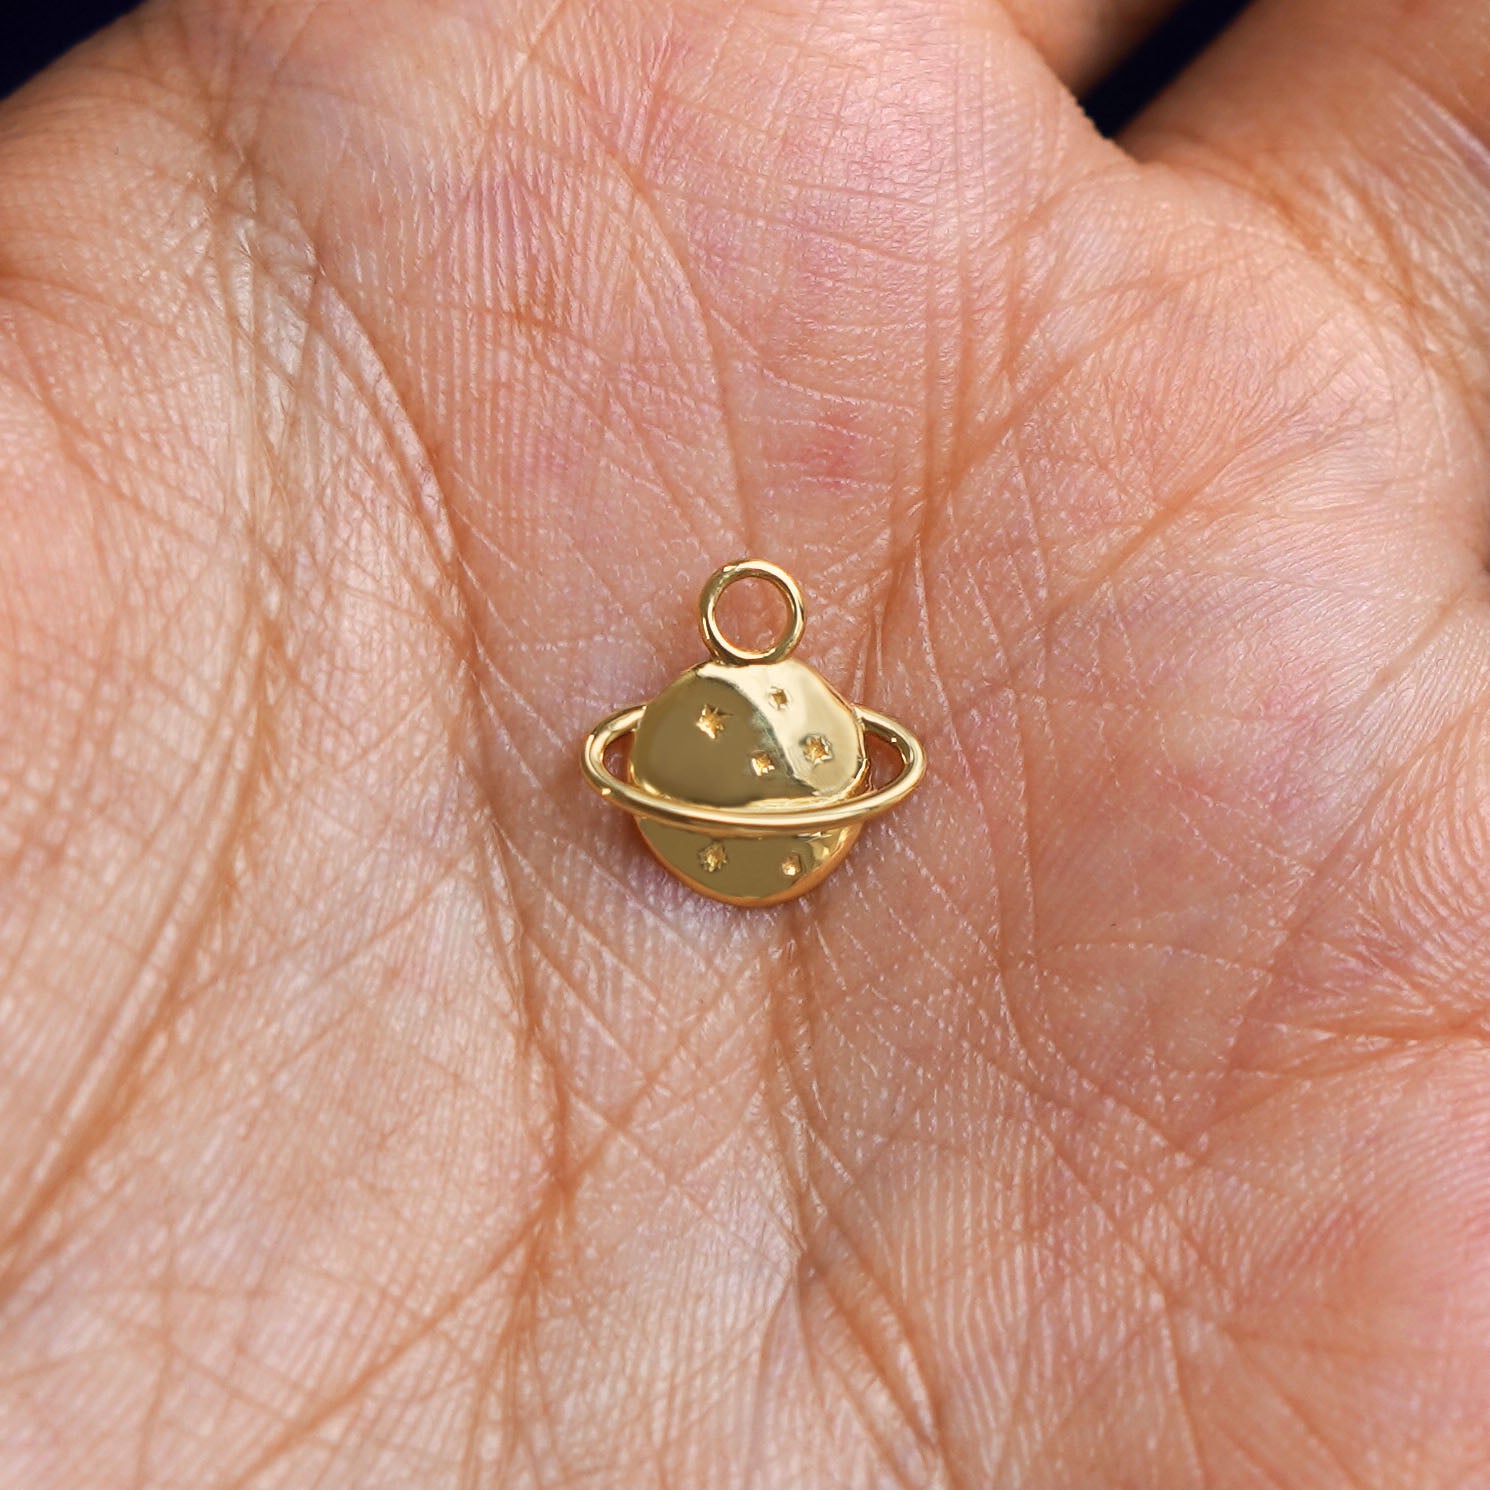 A solid gold Saturn Charm for chain resting in a model's palm